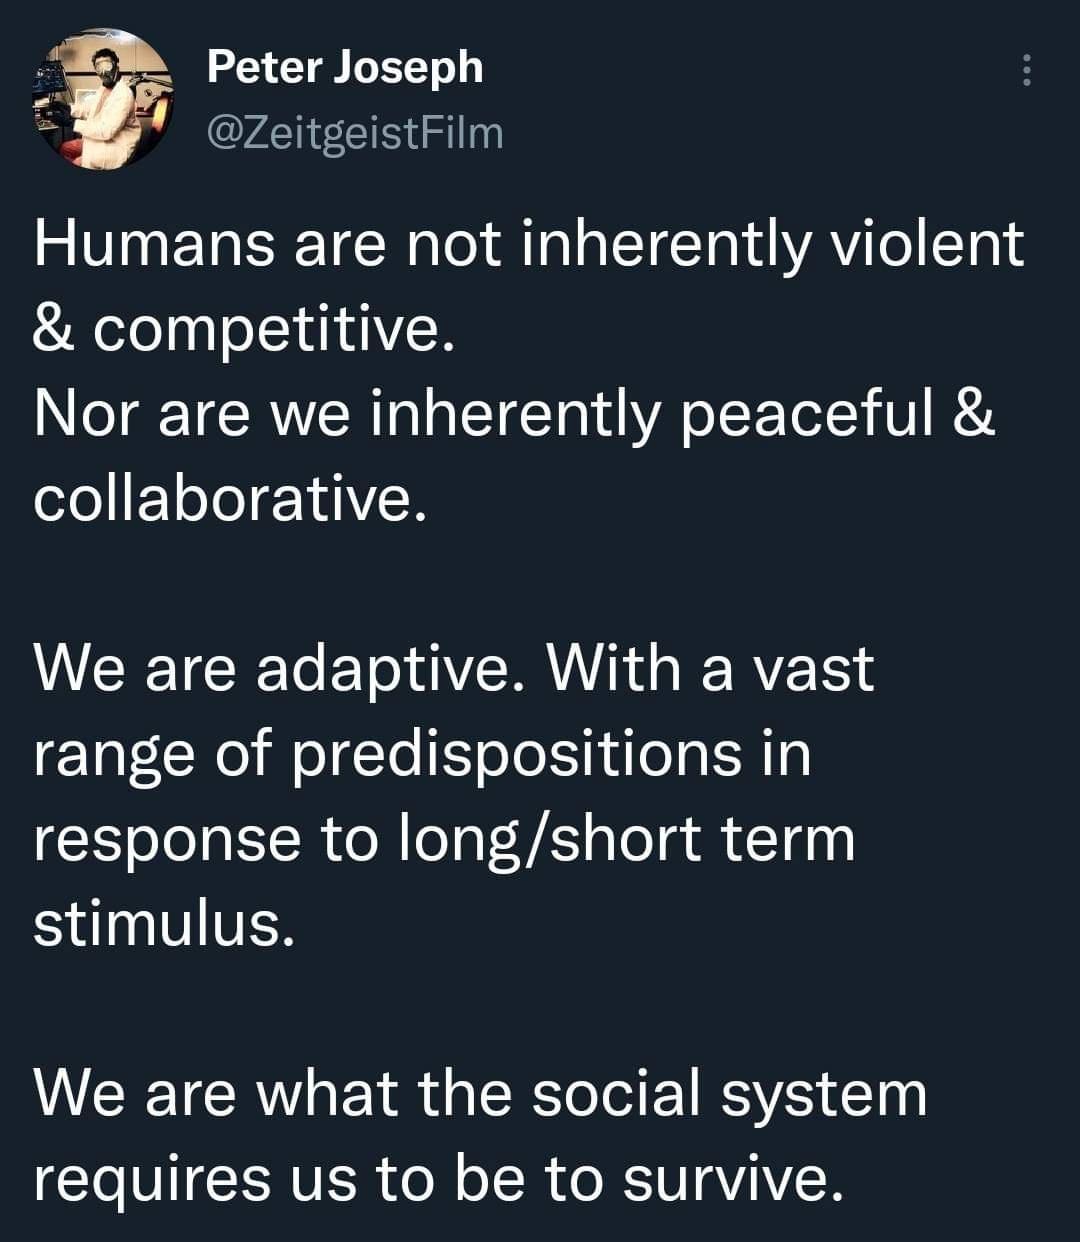 funny and savage tweets - material - Peter Joseph Humans are not inherently violent & competitive. Nor are we inherently peaceful & collaborative. We are adaptive. With a vast range of predispositions in response to longshort term stimulus. We are what th